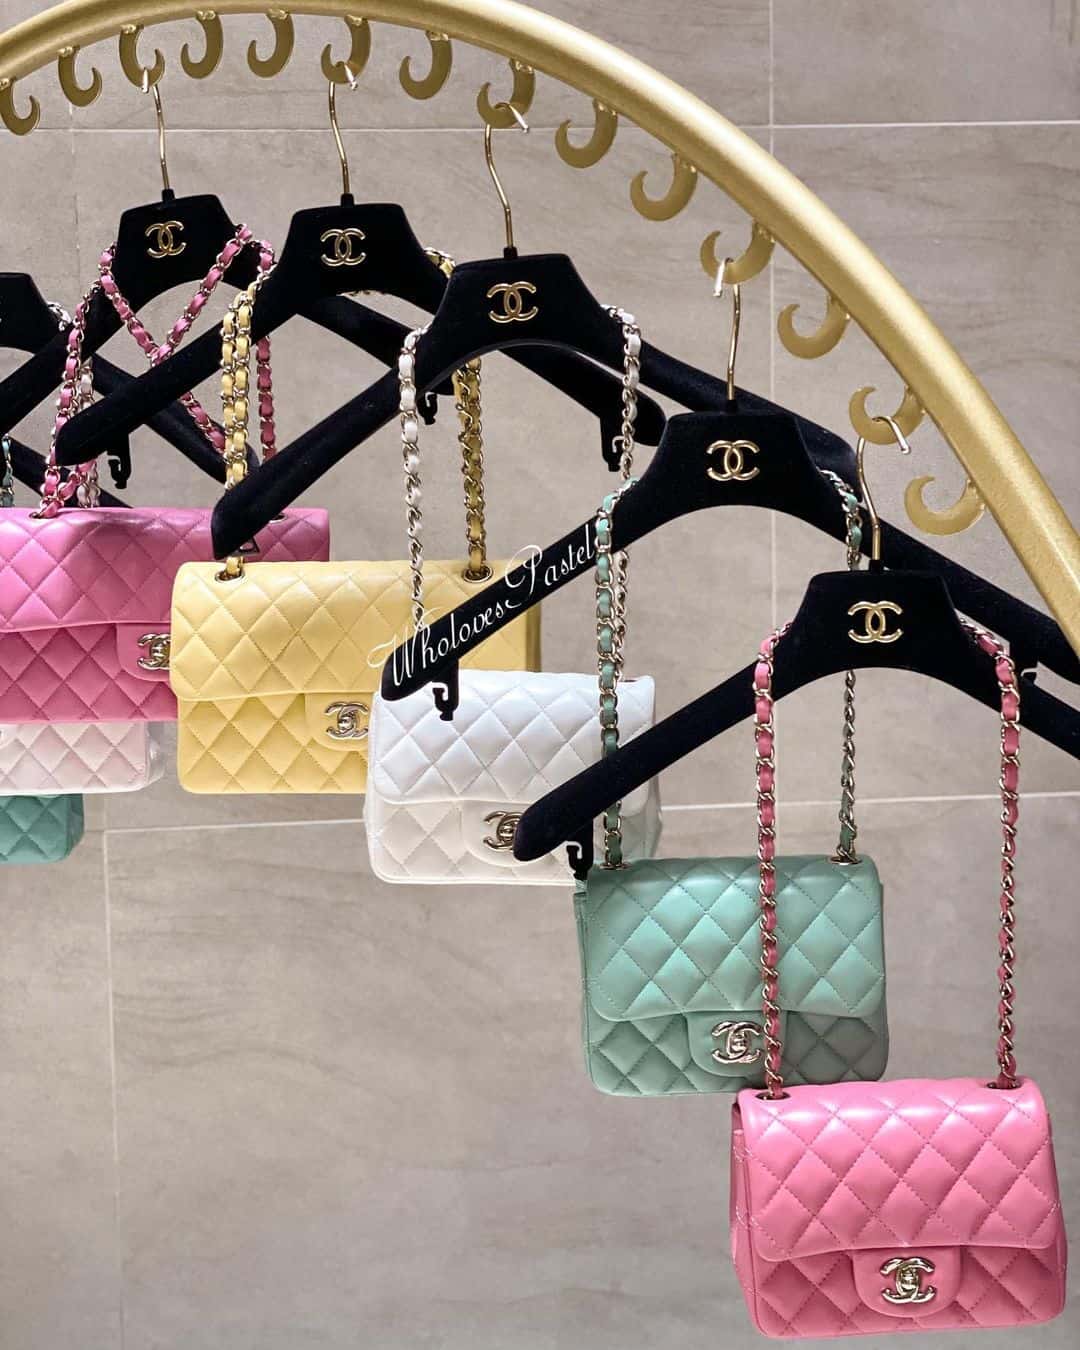 Chanel colorful bags hanging on Chanel hangers